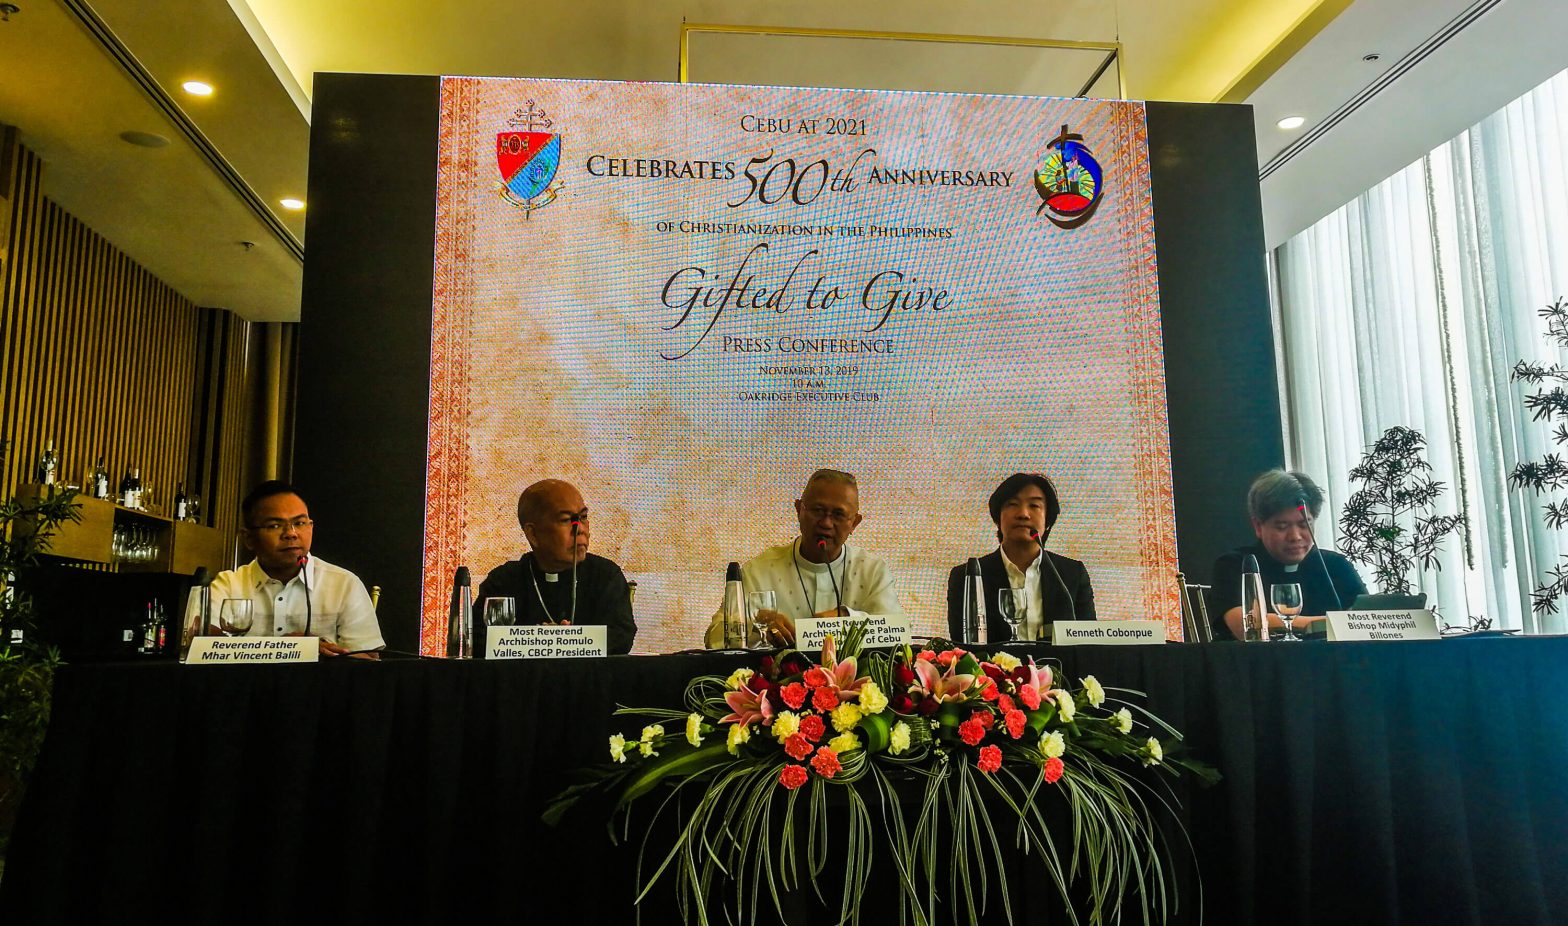 2021 EVENTS. Officials announce the official activities for the 500th anniversary of the Christianization in the Philippines. Present during the press conference in Oakridge Business Park are (from left) Fr. Mhar Vincent Balili; Davao Archbishop Romulo Valles, who is also the CBCP president; Cebu Archbishop Jose Palma, designer Kenneth Cobonpue, who heads the Visayas Quincentennial Committee; and Cebu Auxiliary Bishop Midyphil Billones.